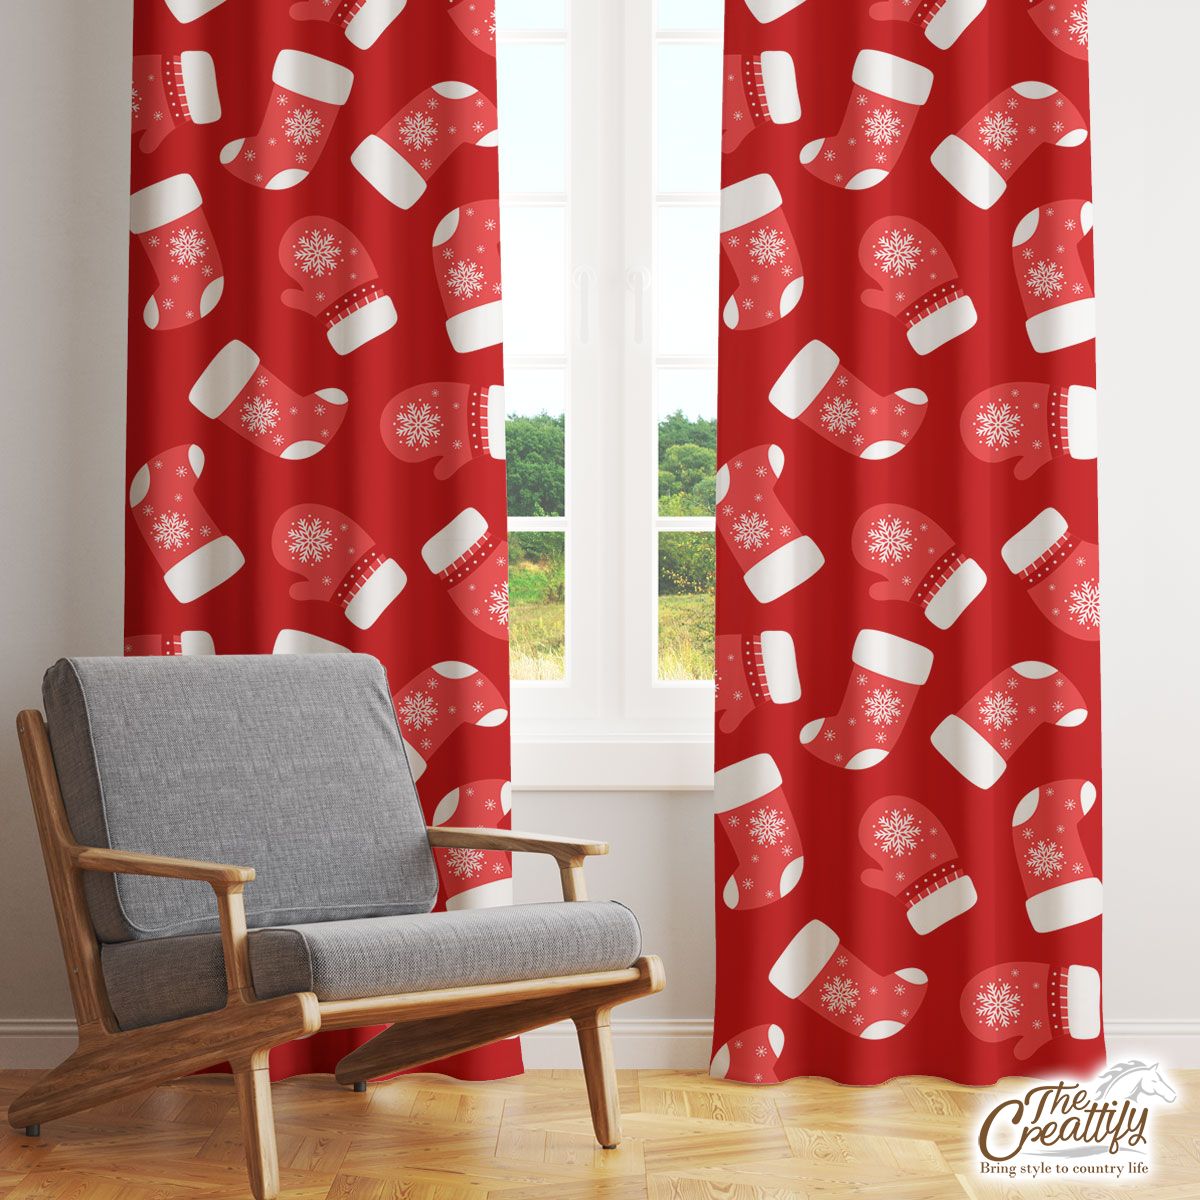 Christmas Socks, Santa Hat And Wool Gloves Filled In Red Snowflake Pattern Window Curtain